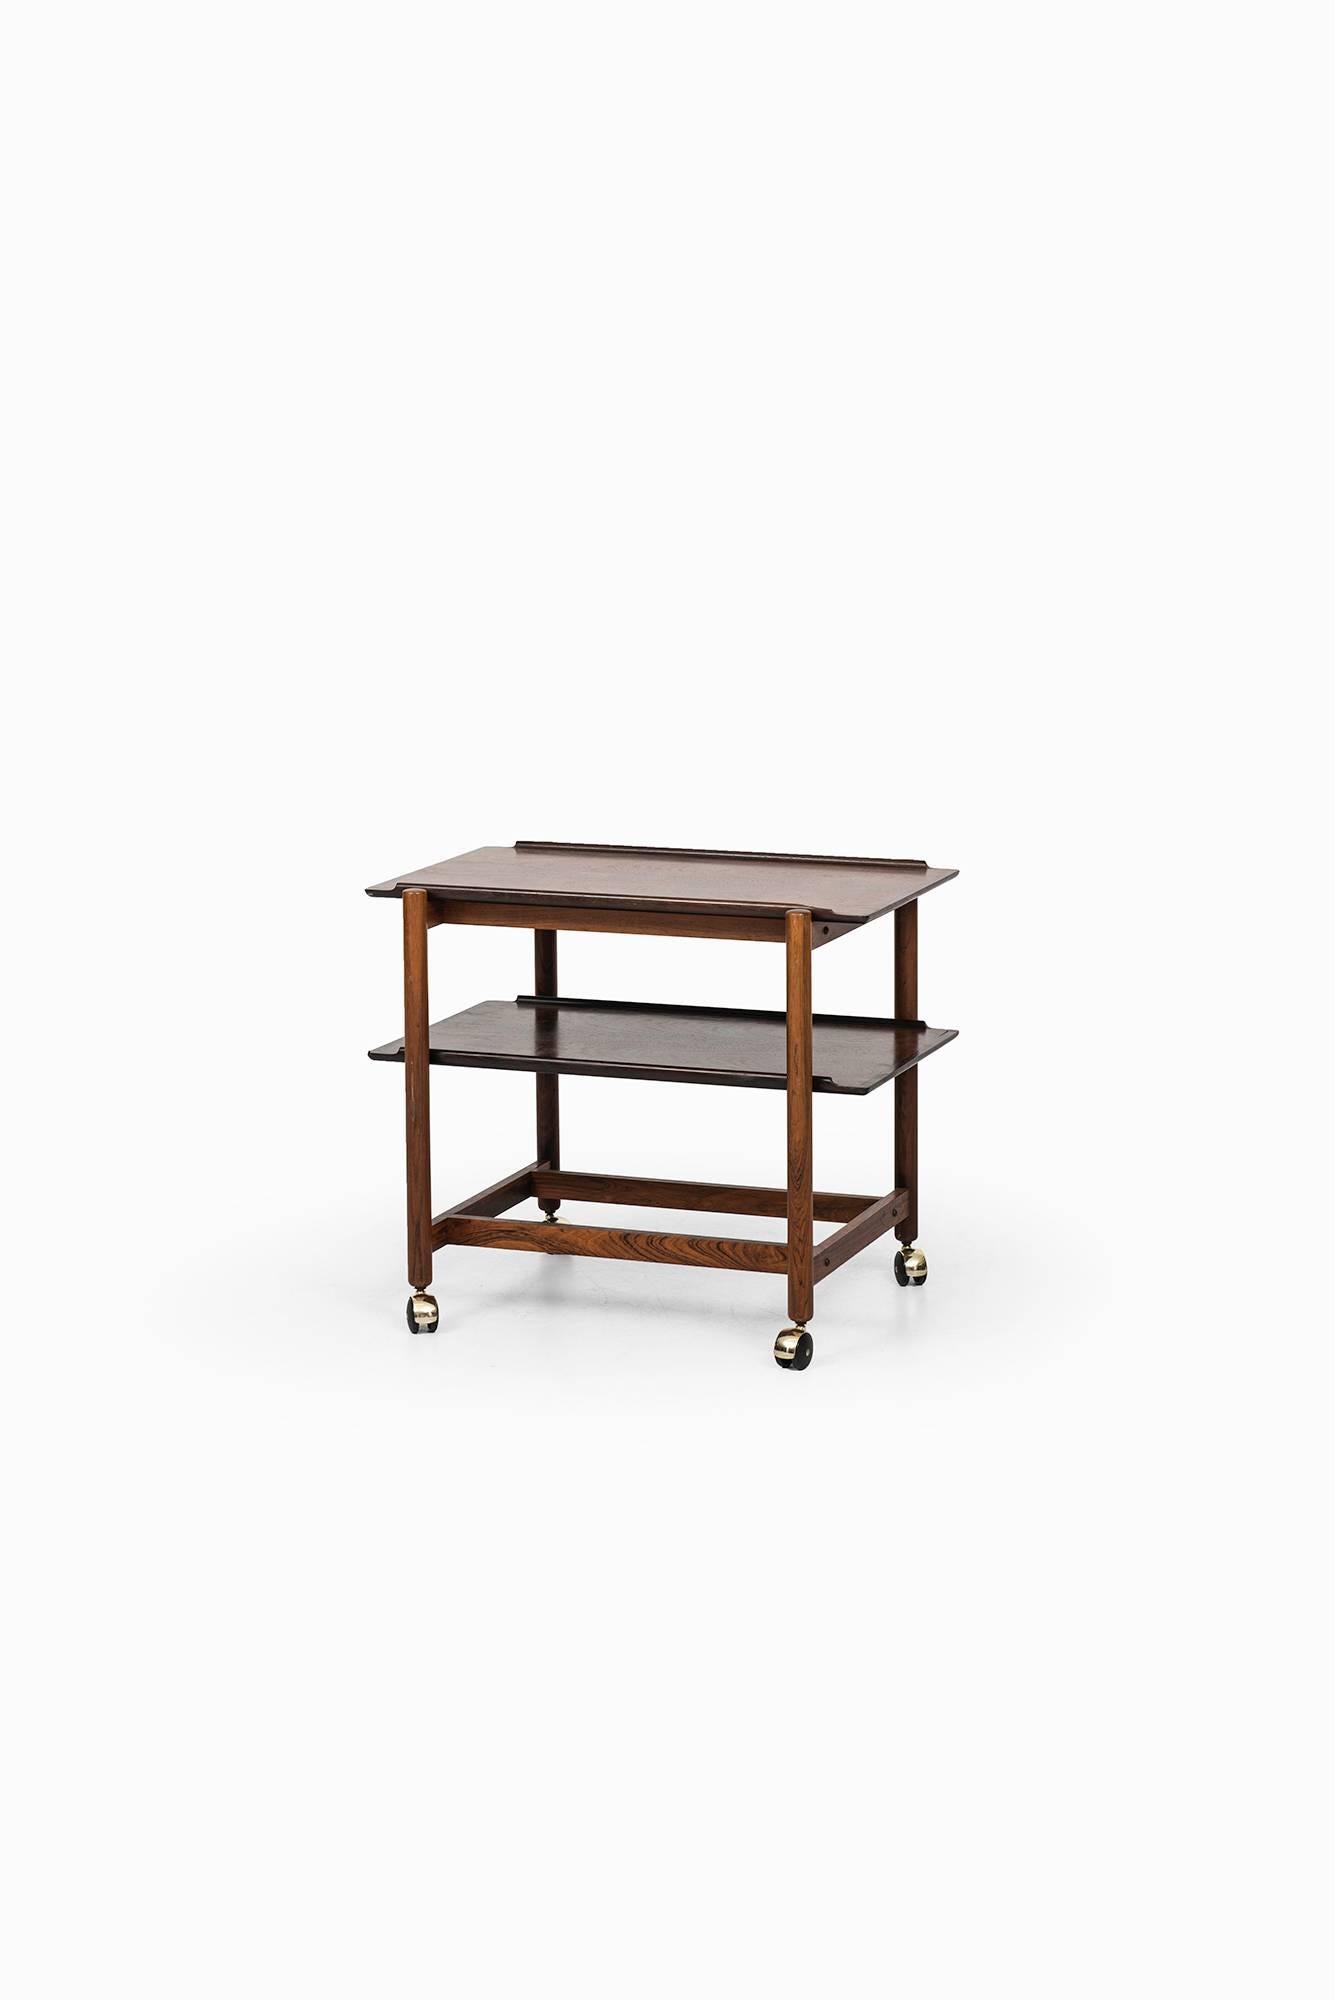 Mid-20th Century Poul Hundevad Trolley in Rosewood by Poul Hundevad & Co in Denmark